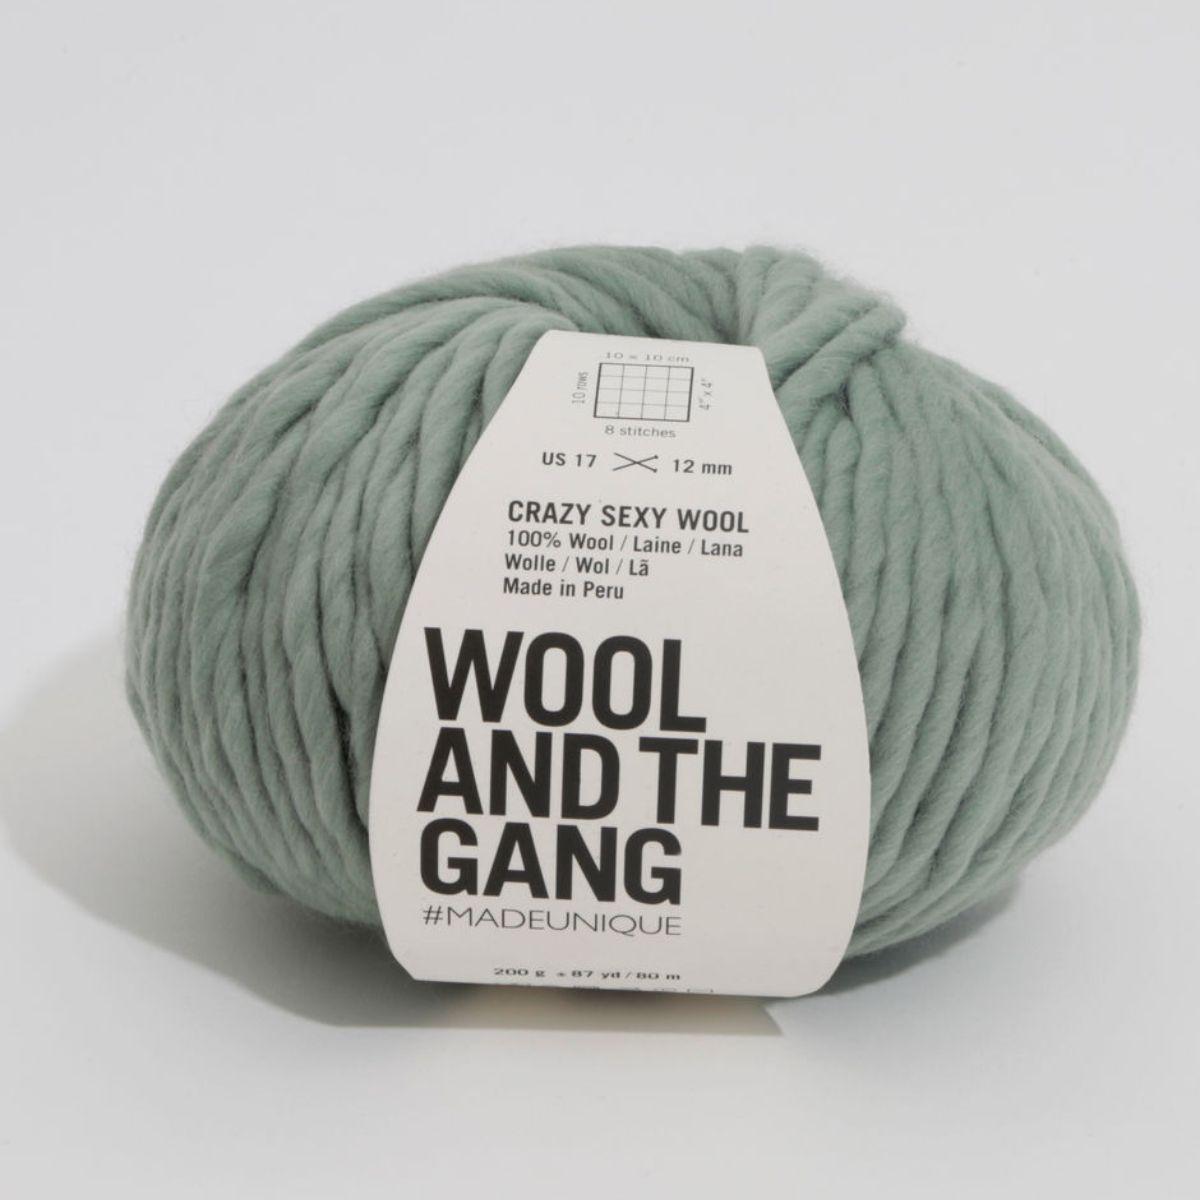 Wool and The Gang | Crazy Sexy Wool| Funfetti | Glow Up Cream